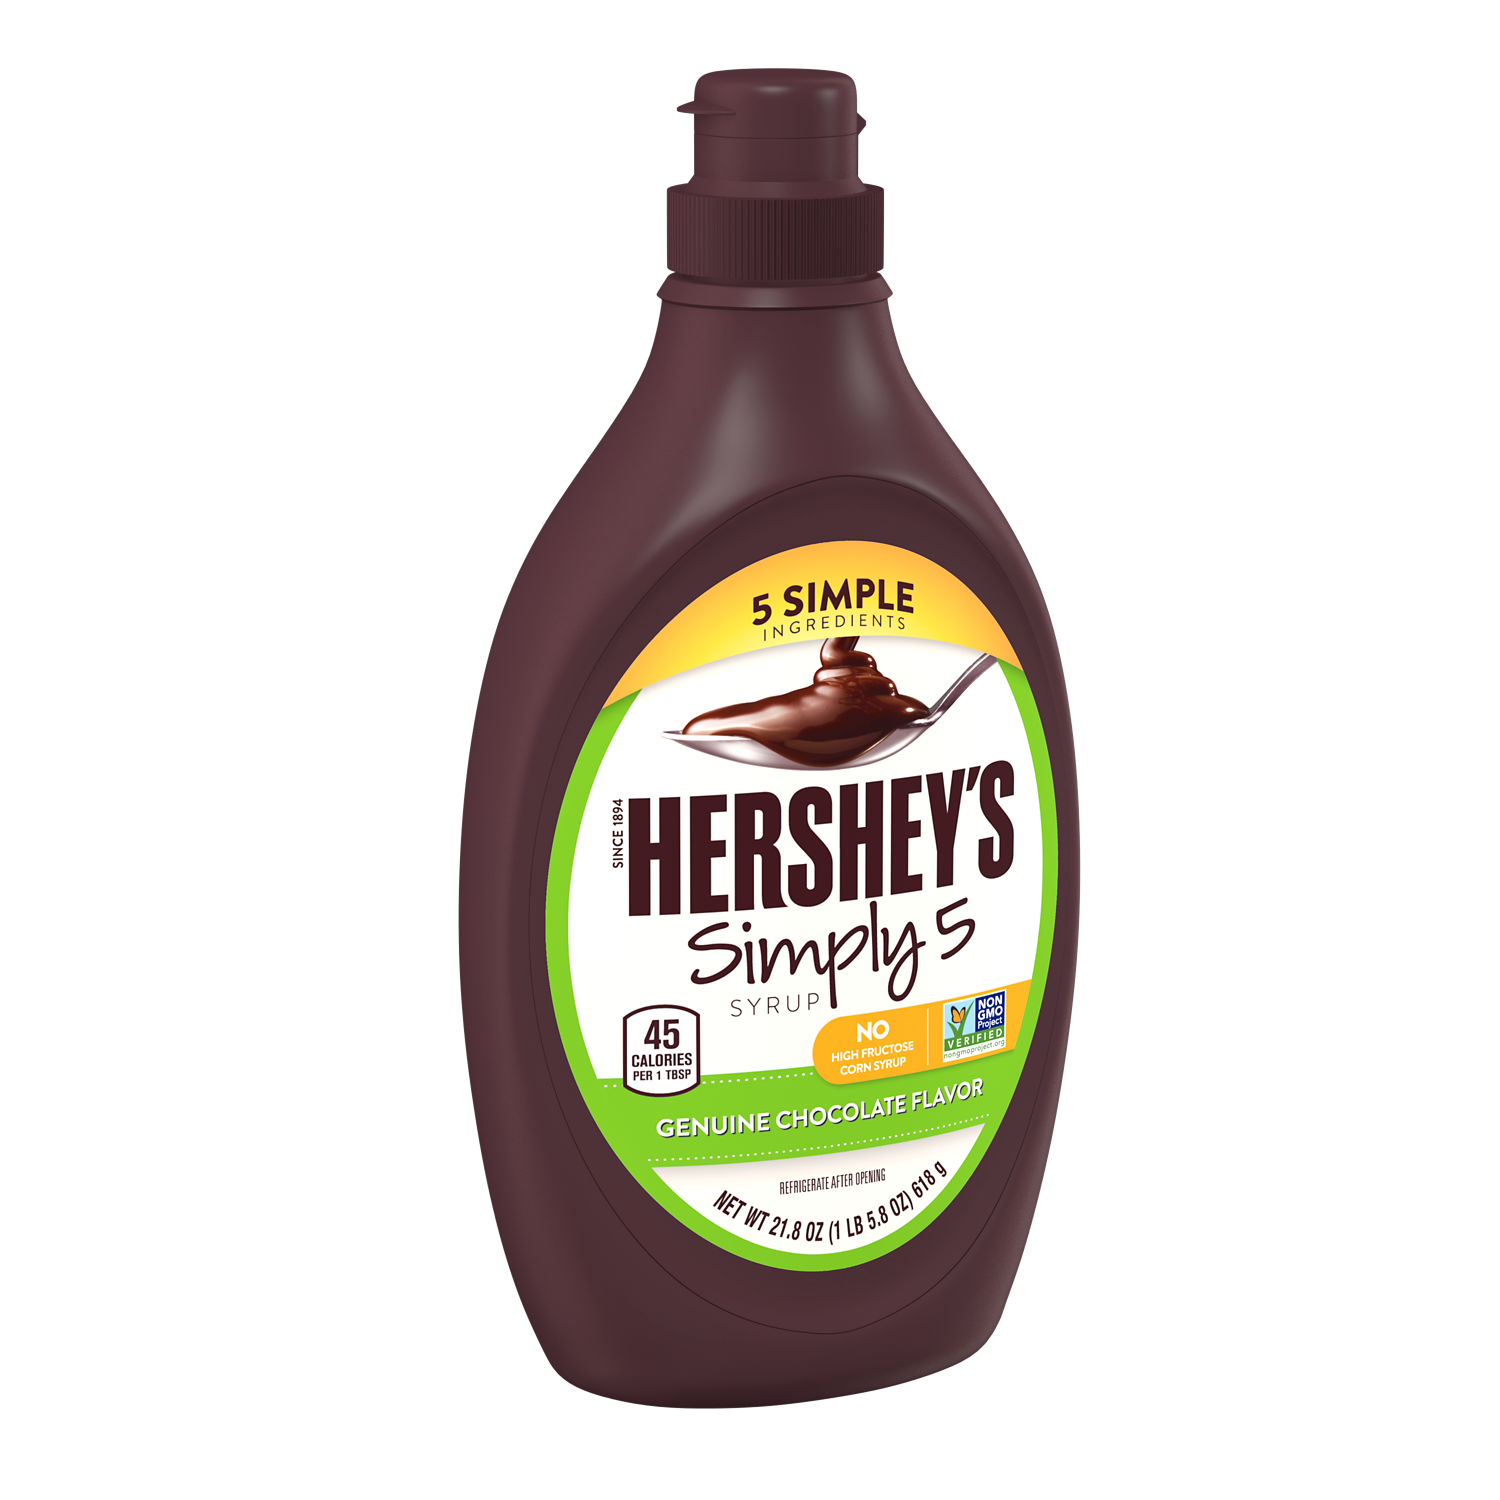 HERSHEY'S Simply 5 Chocolate Syrup, 21.8 oz bottle - Left Side of Package